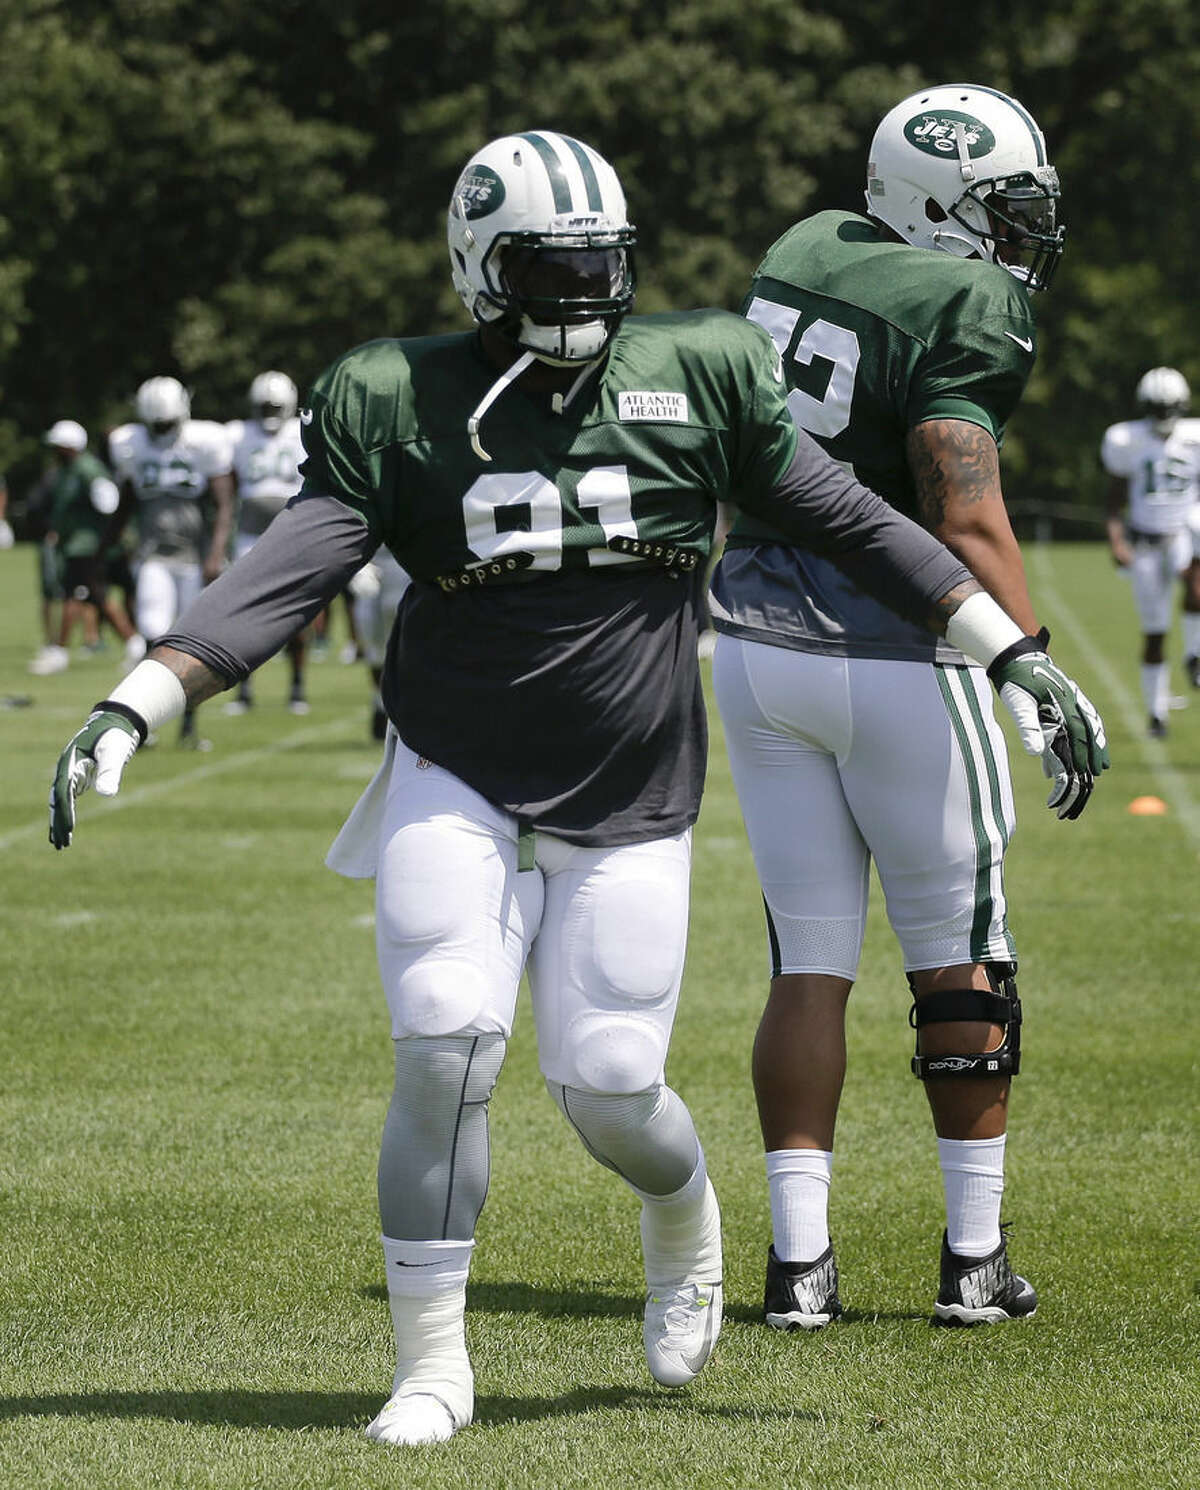 New York Jets defensive end Sheldon Richardson stretches with teammates at their NFL football training camp, Saturday, Aug. 1, 2015, in Florham Park, N.J. (AP Photo/Julie Jacobson)